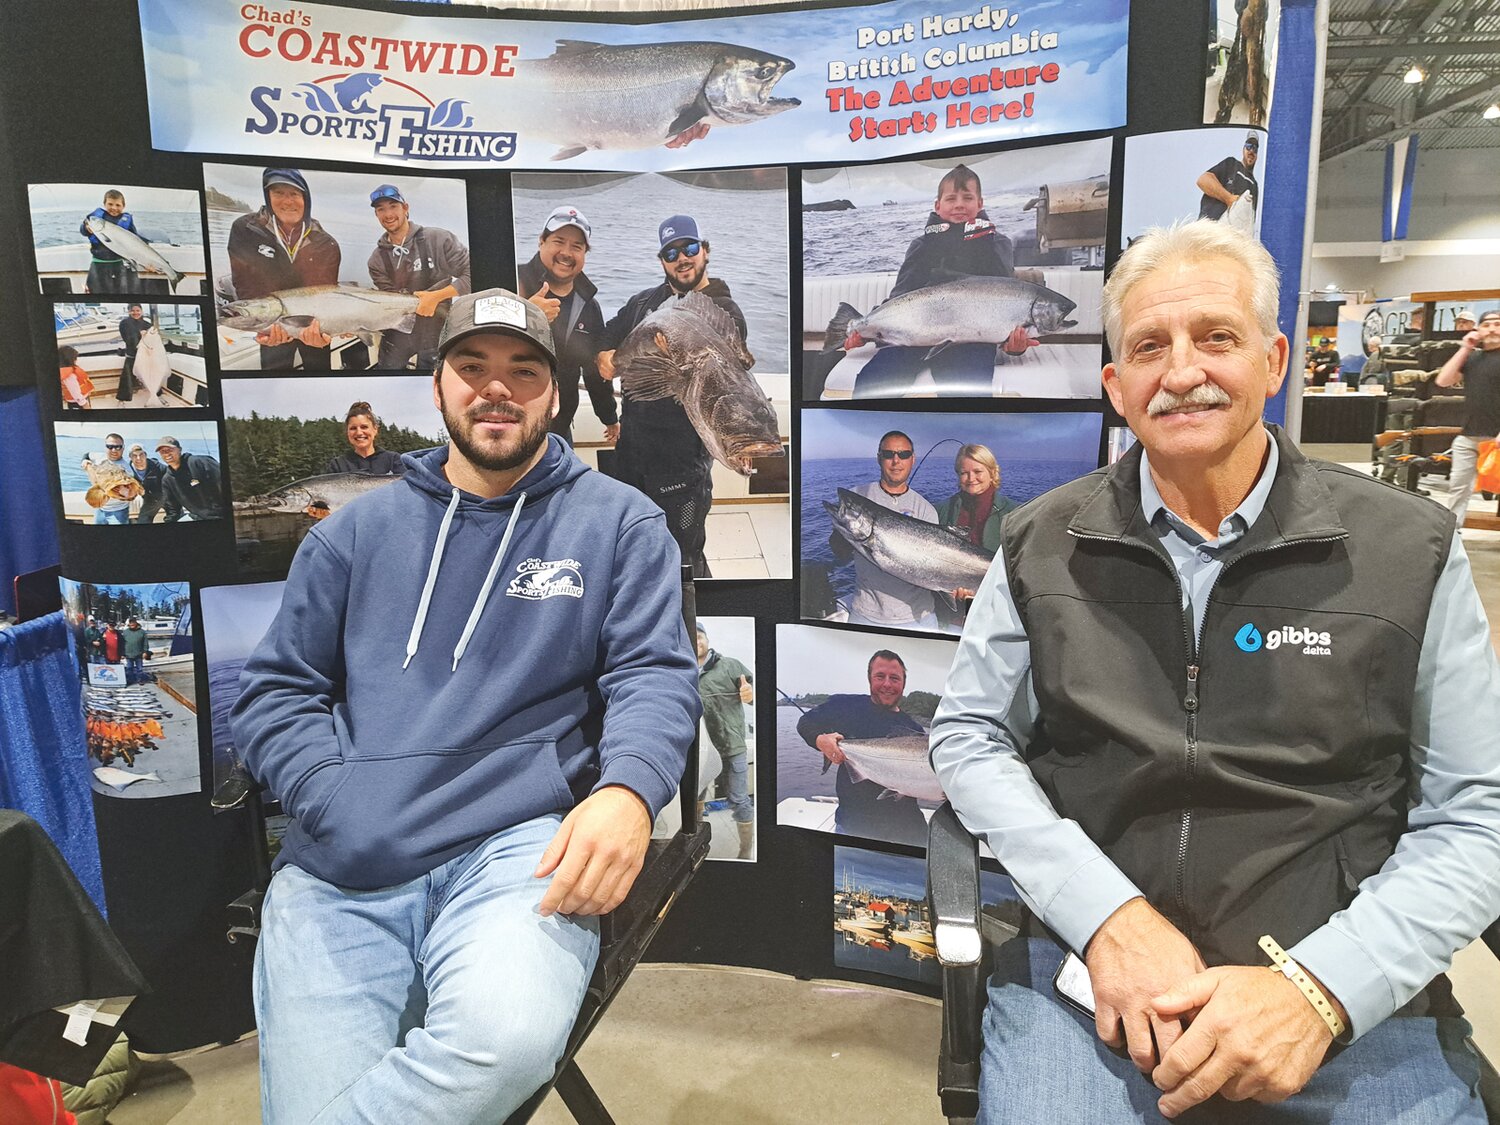 Coastwide Sports Fishing offers multi-day fishing trips out of Port Hardy, B.C.  Photo by J. Kruse